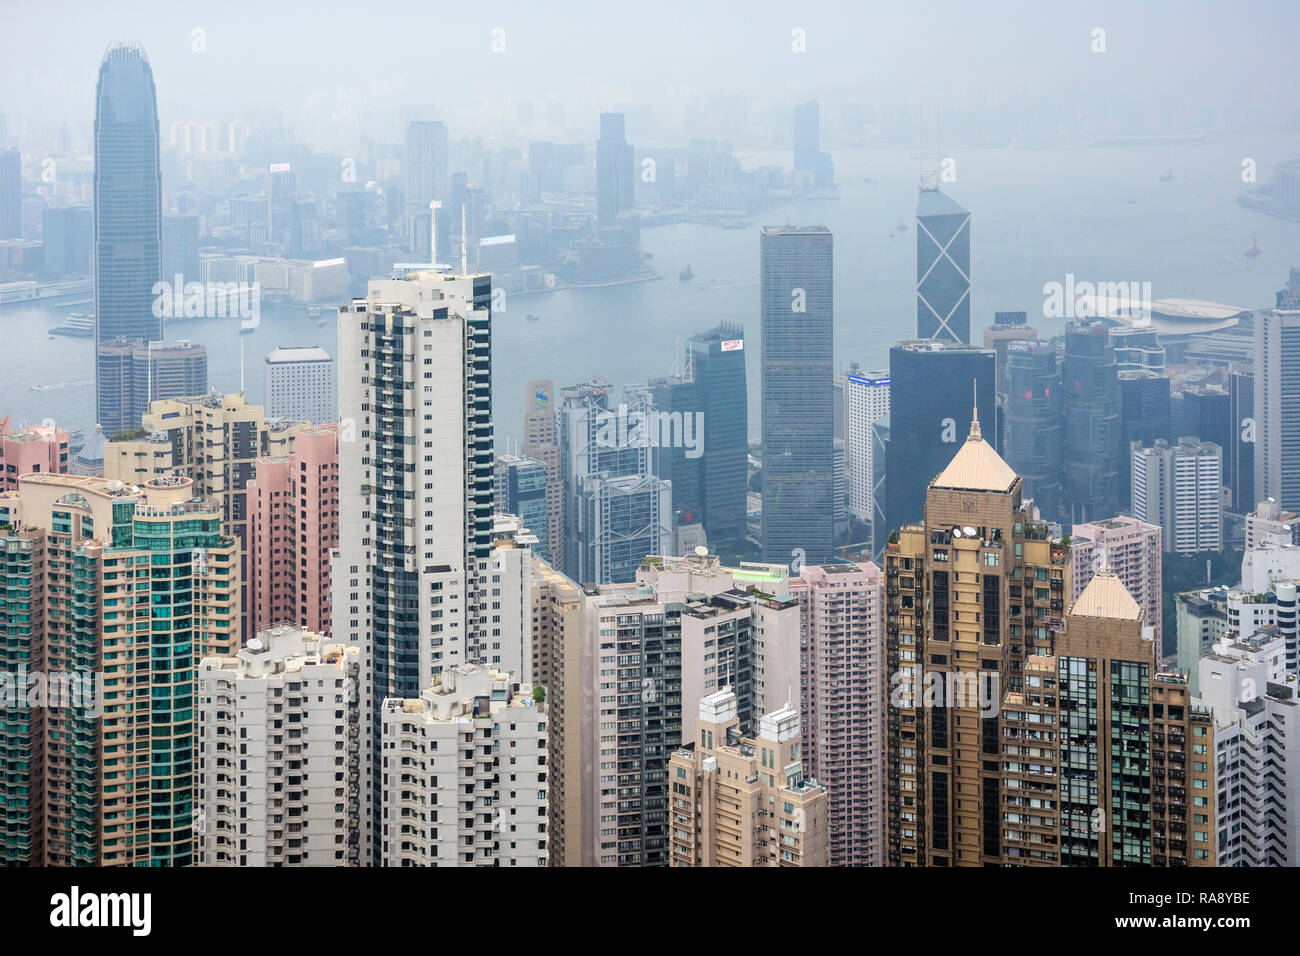 Restricted view of Hong Kong due to haze from air pollution Stock Photo